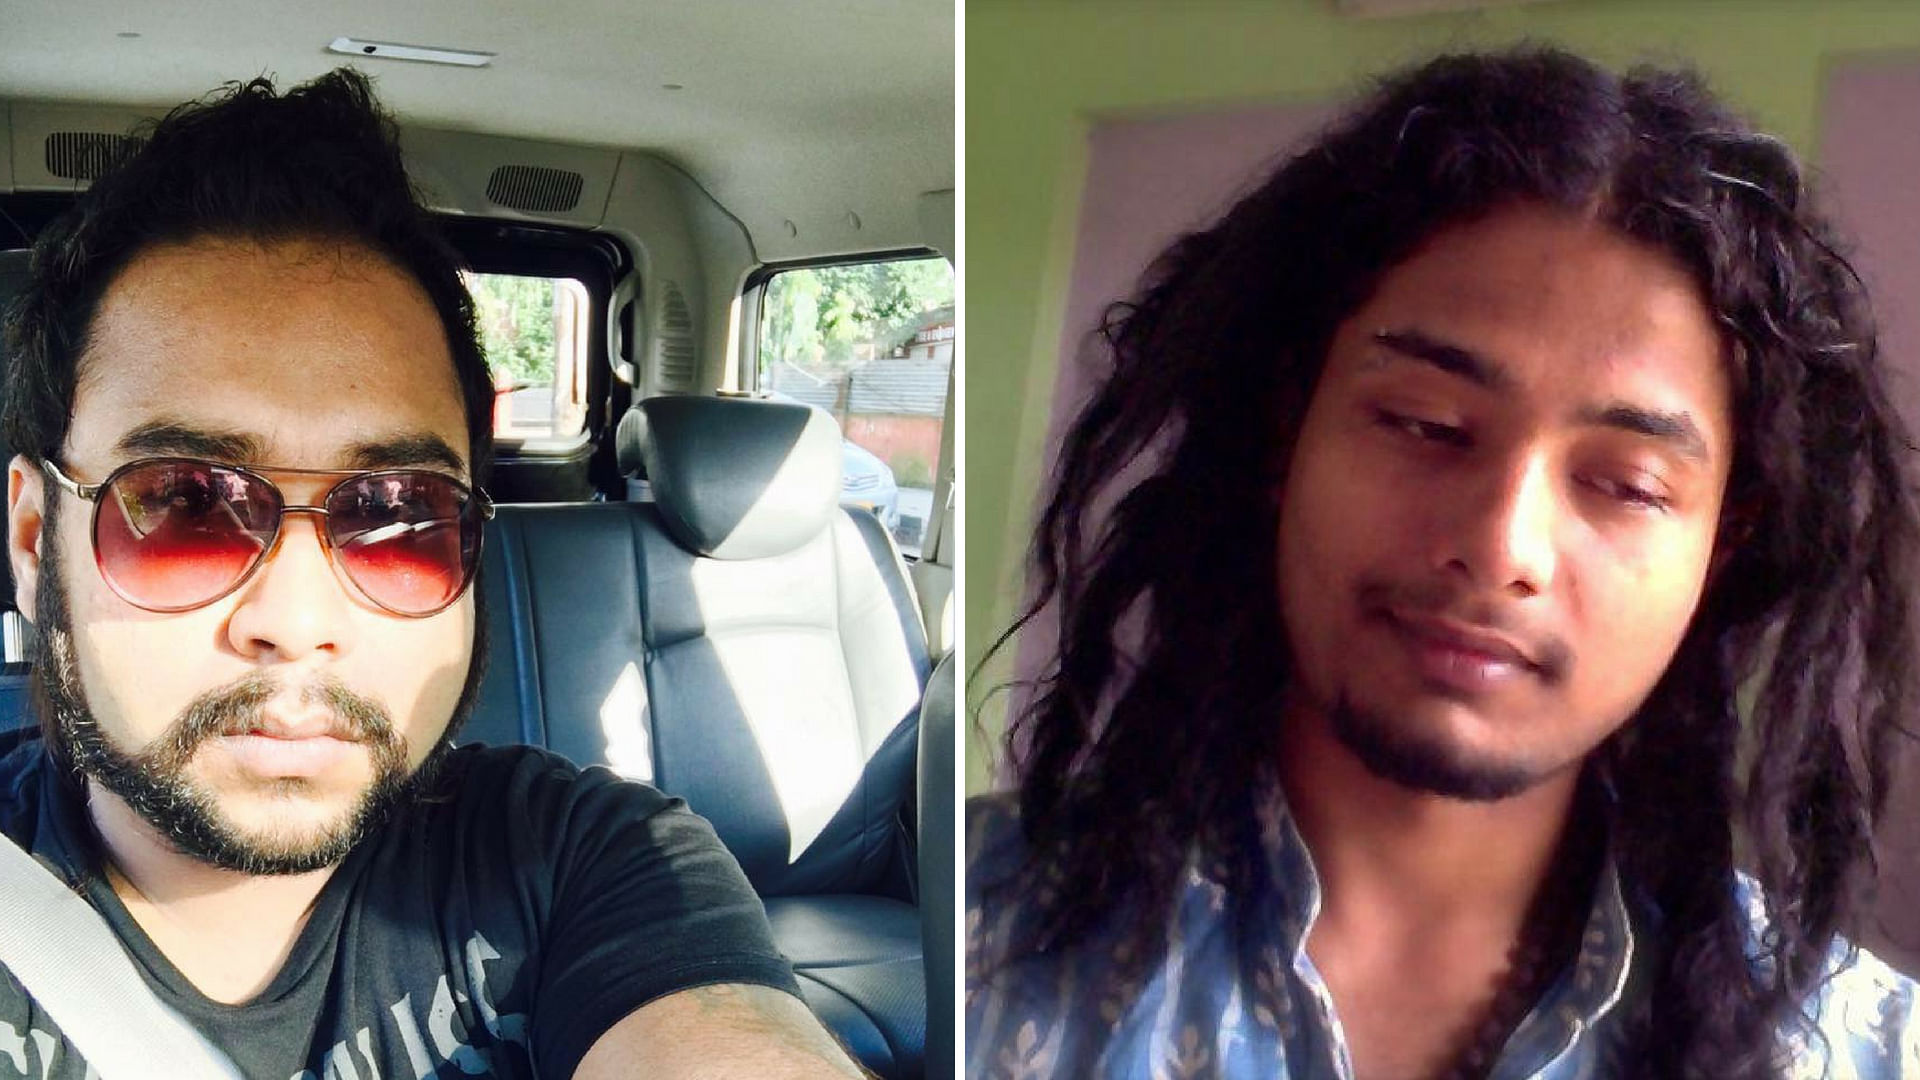  Nilotpal Das (right), a sound engineer based in Mumbai, and his friend Abhijeet Nath, a businessman were lynched by a mob in Karbi Anglong district of Assam.